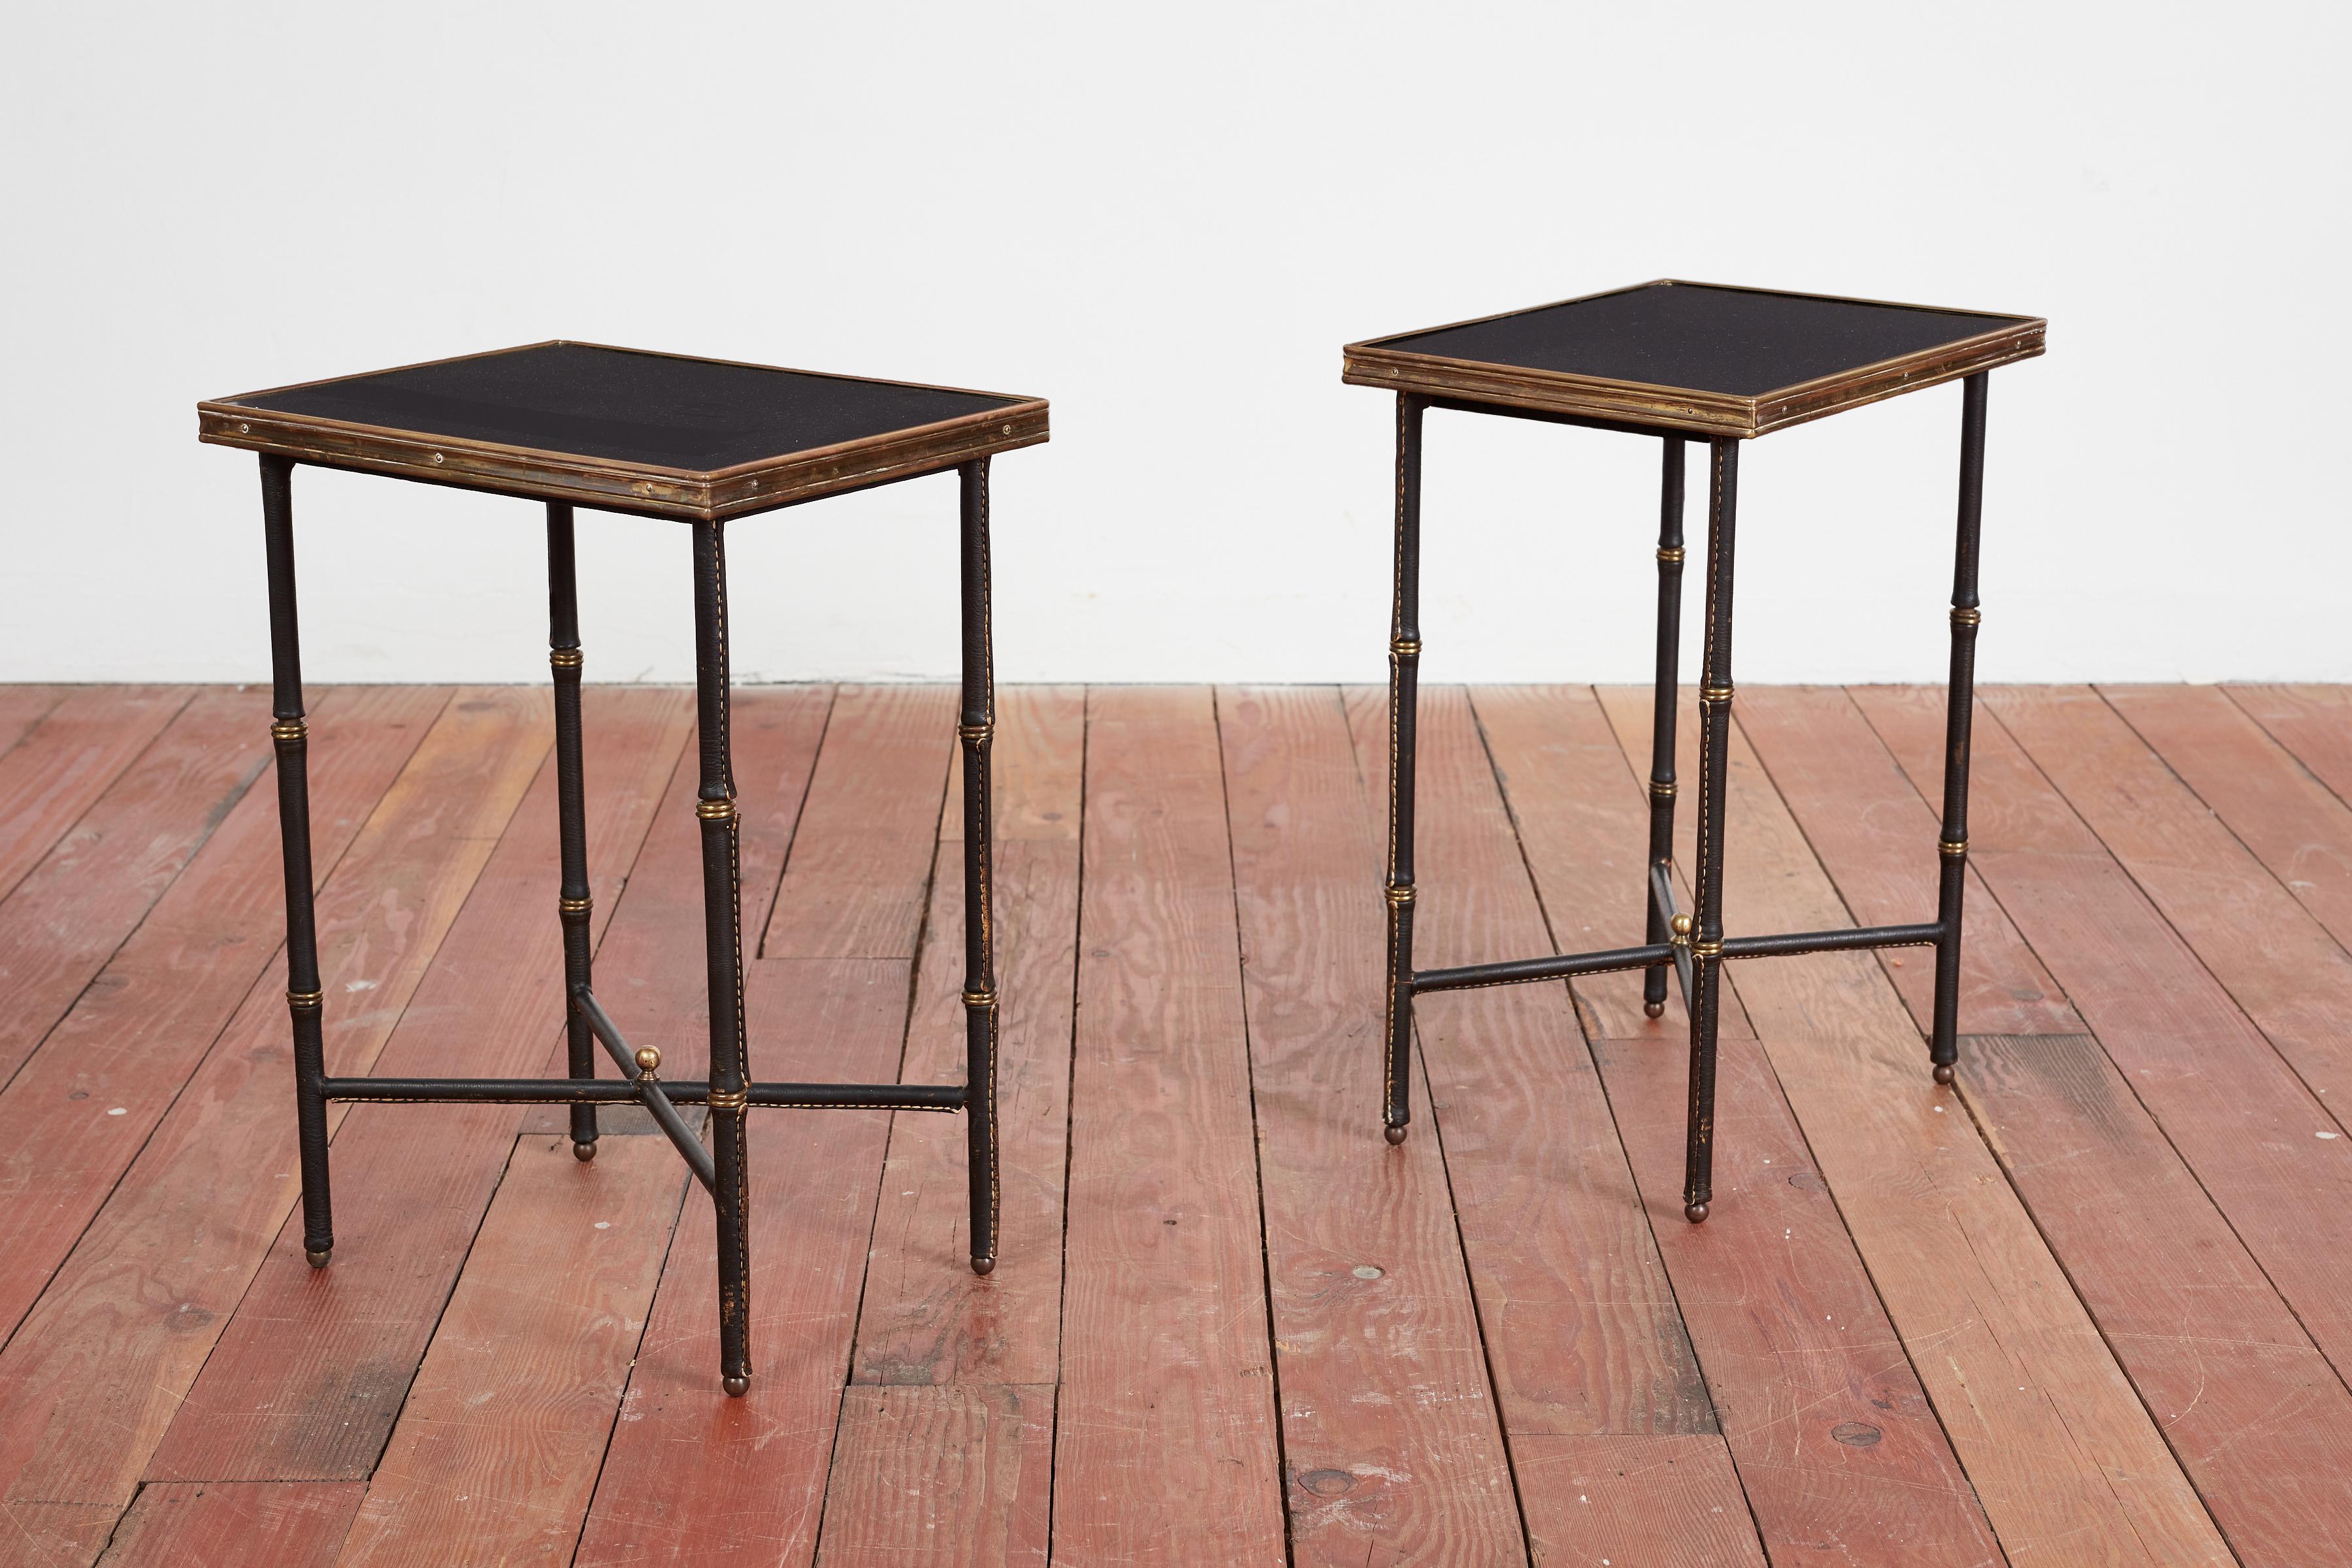 Pair of Jacques Adnet end tables with original bamboo leather legs with contrast stitching and brass feet. 

Petite in scale - with brass edging with just the right patina. 

France, circa 1940s